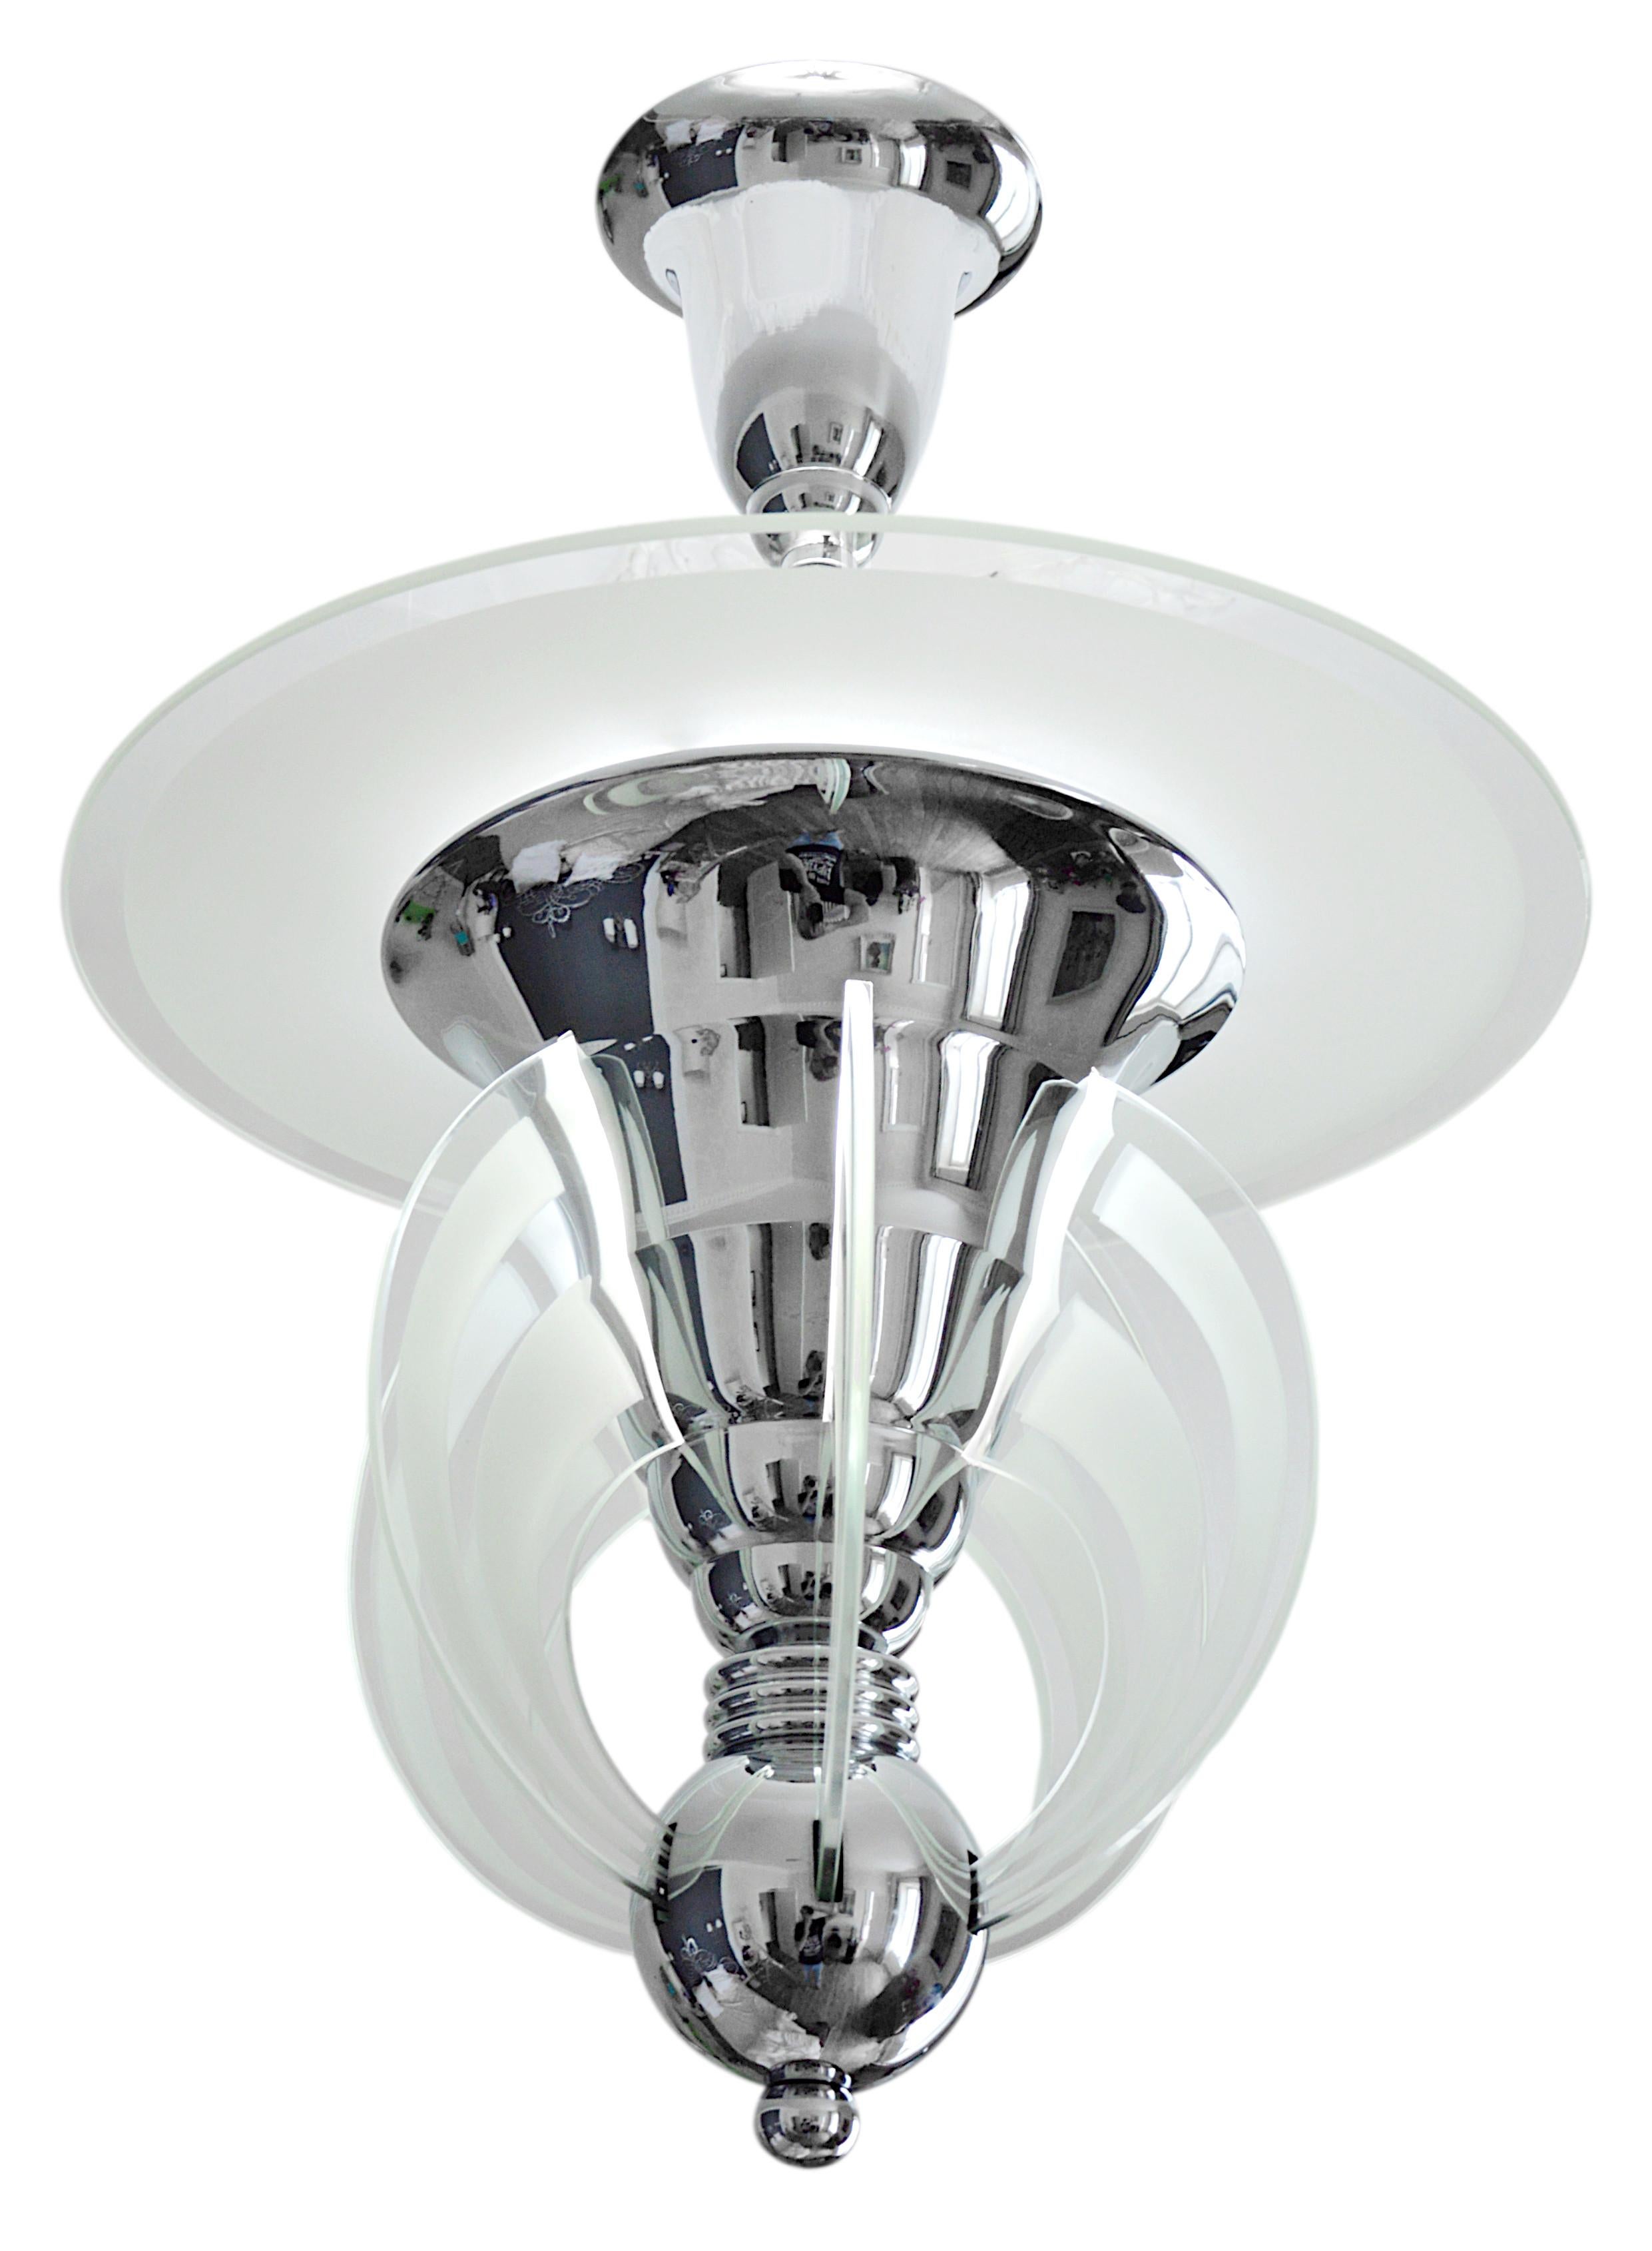 Frosted Maison Petitot French Art Deco Modernist Chandelier, 1930 For Sale